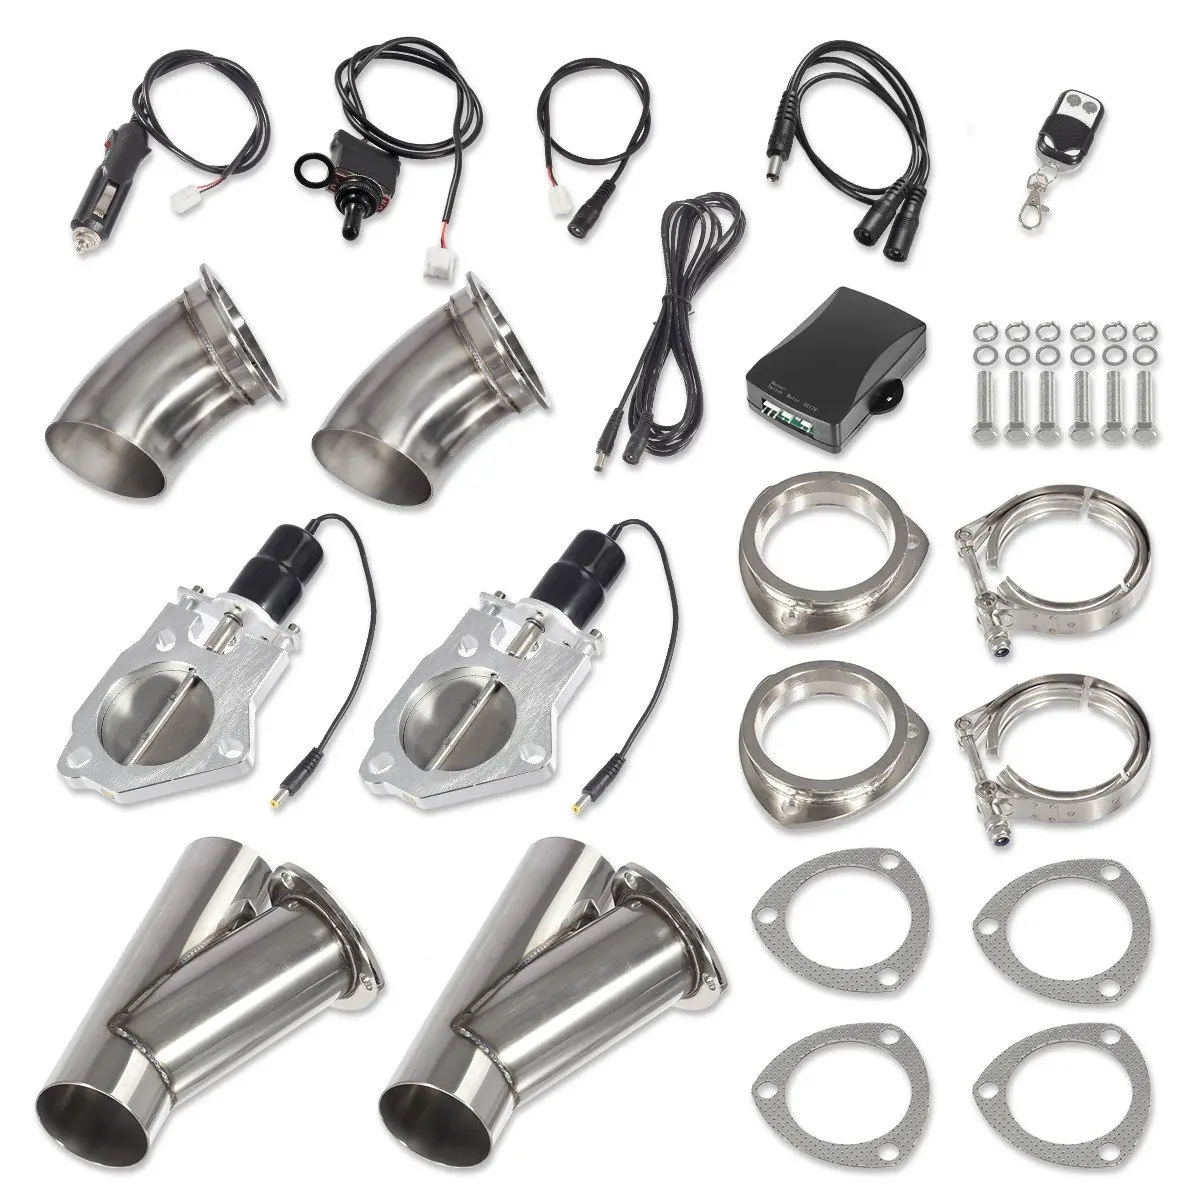 Cheap 3 Inch Exhaust Cutout, find 3 Inch Exhaust Cutout deals on line